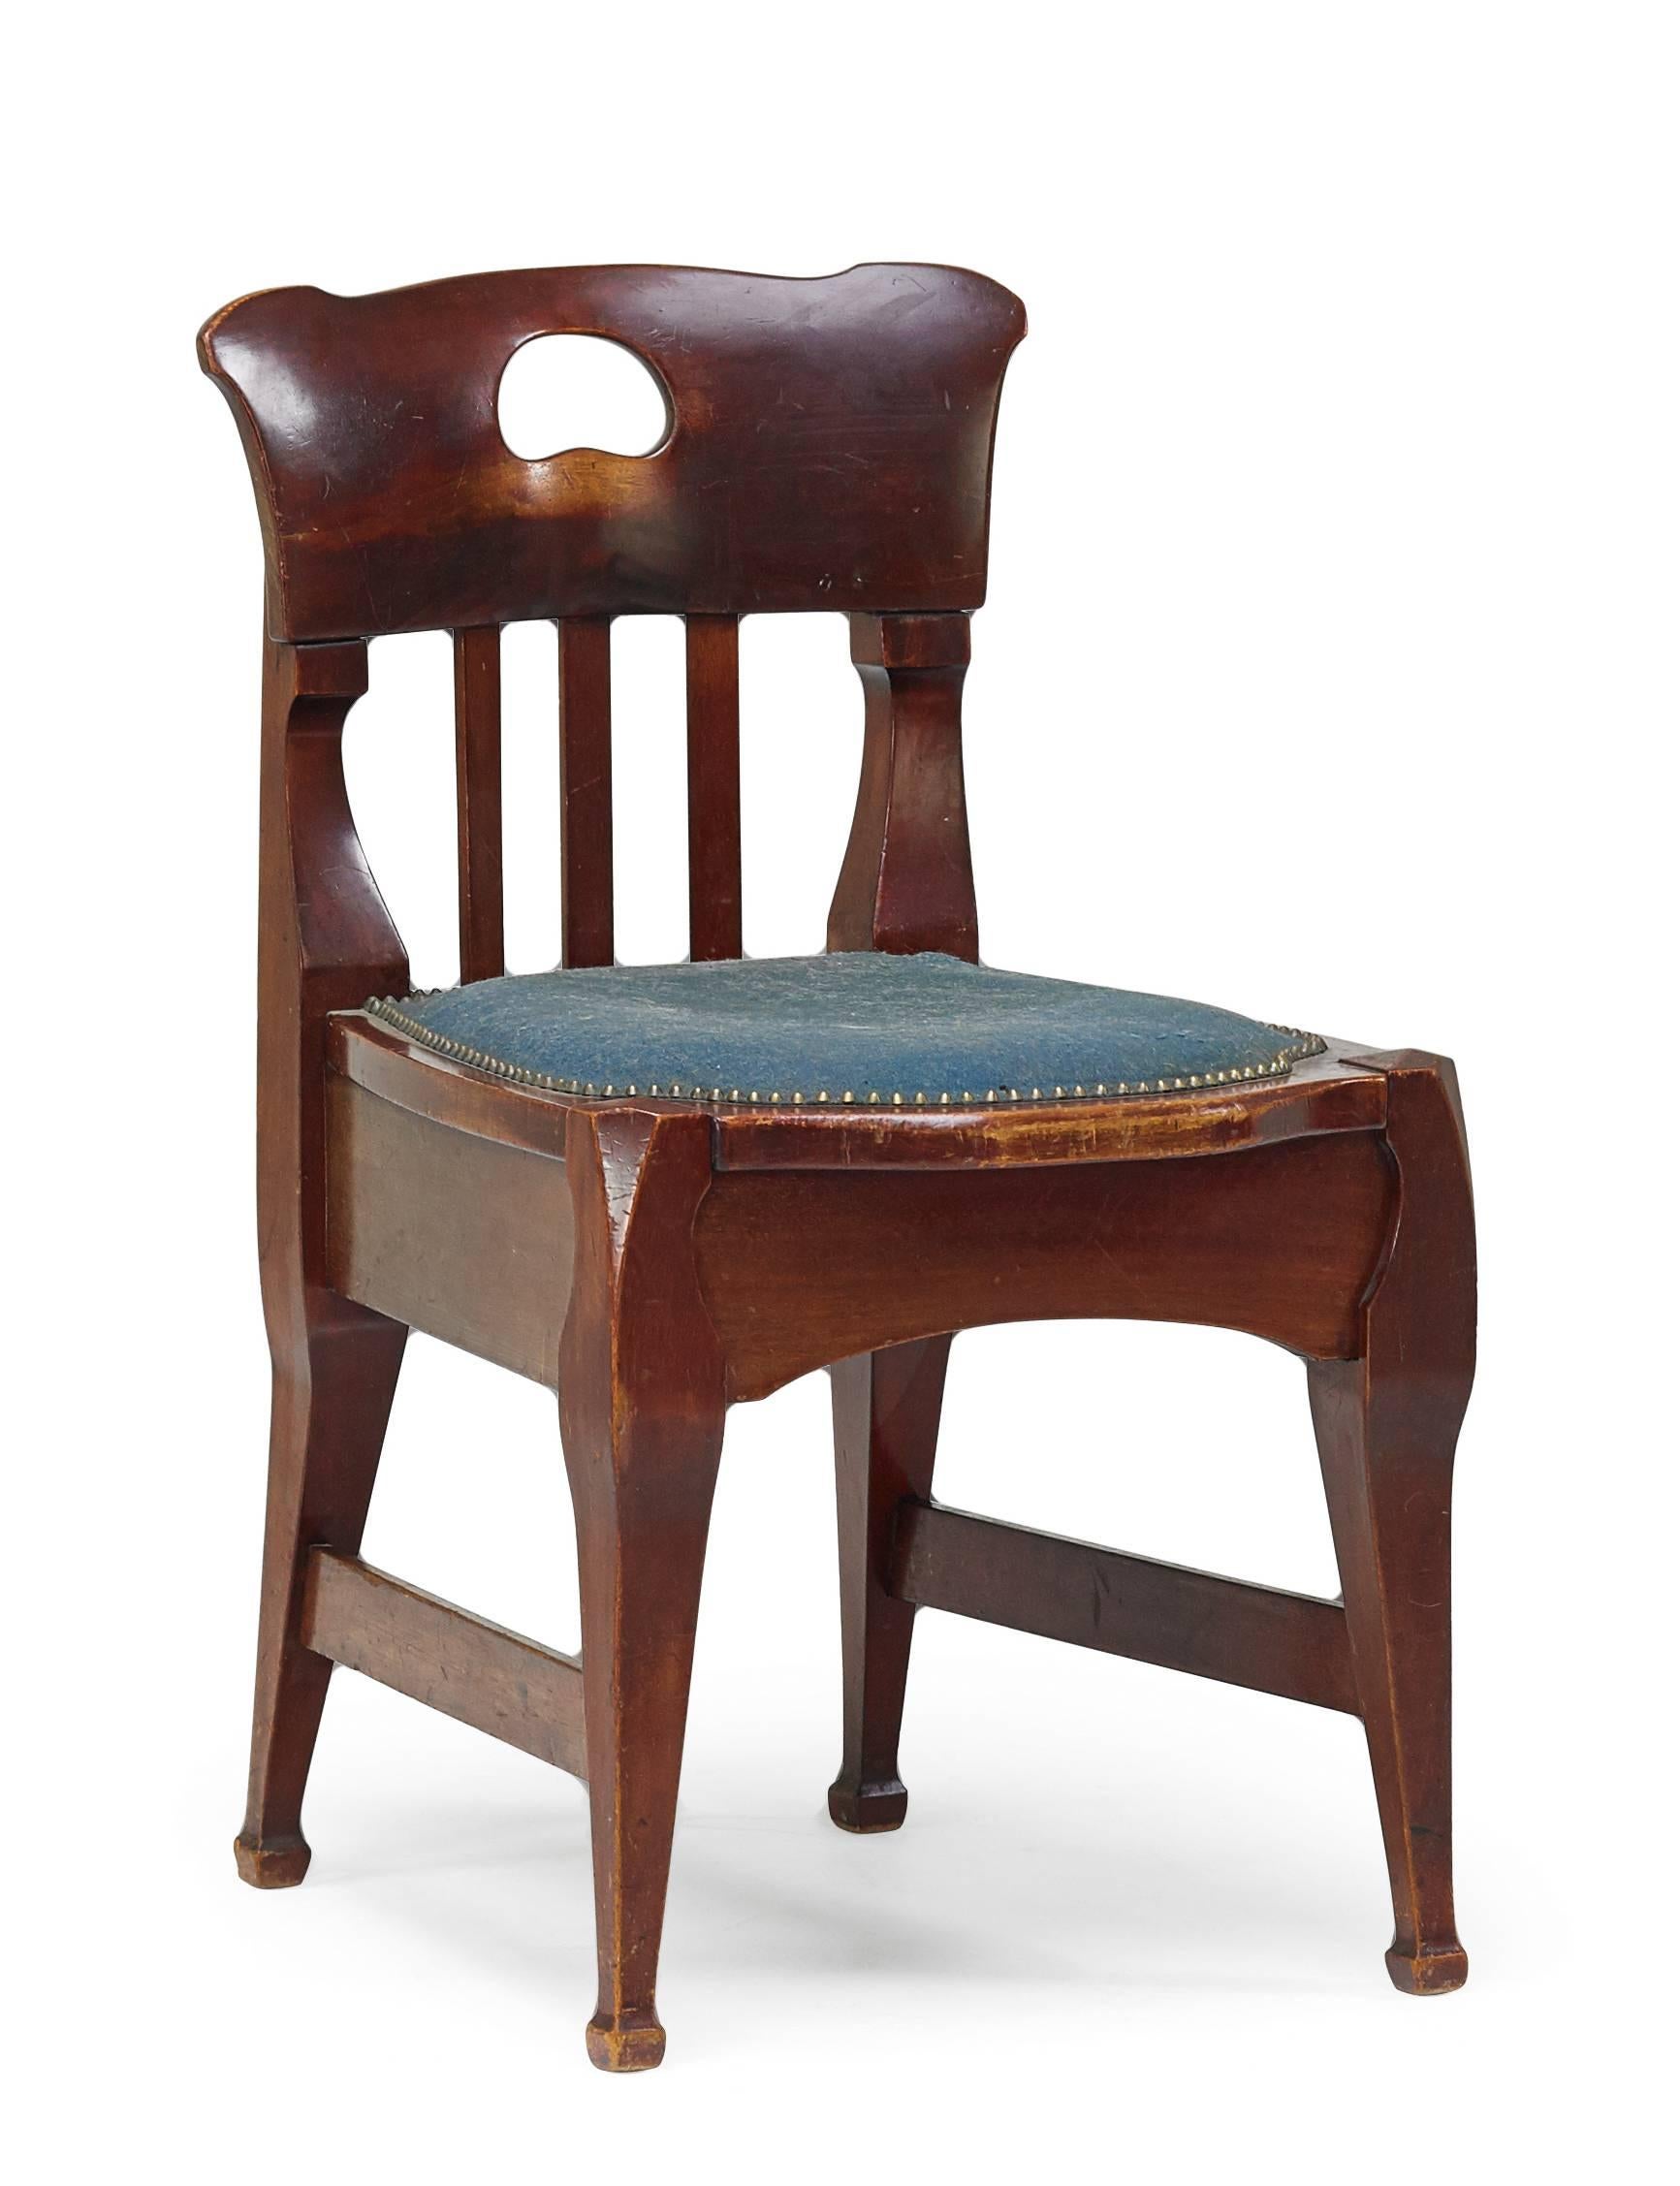 Jugendstil Chair by Richard Riemerschmid In Excellent Condition For Sale In Los Angeles, CA